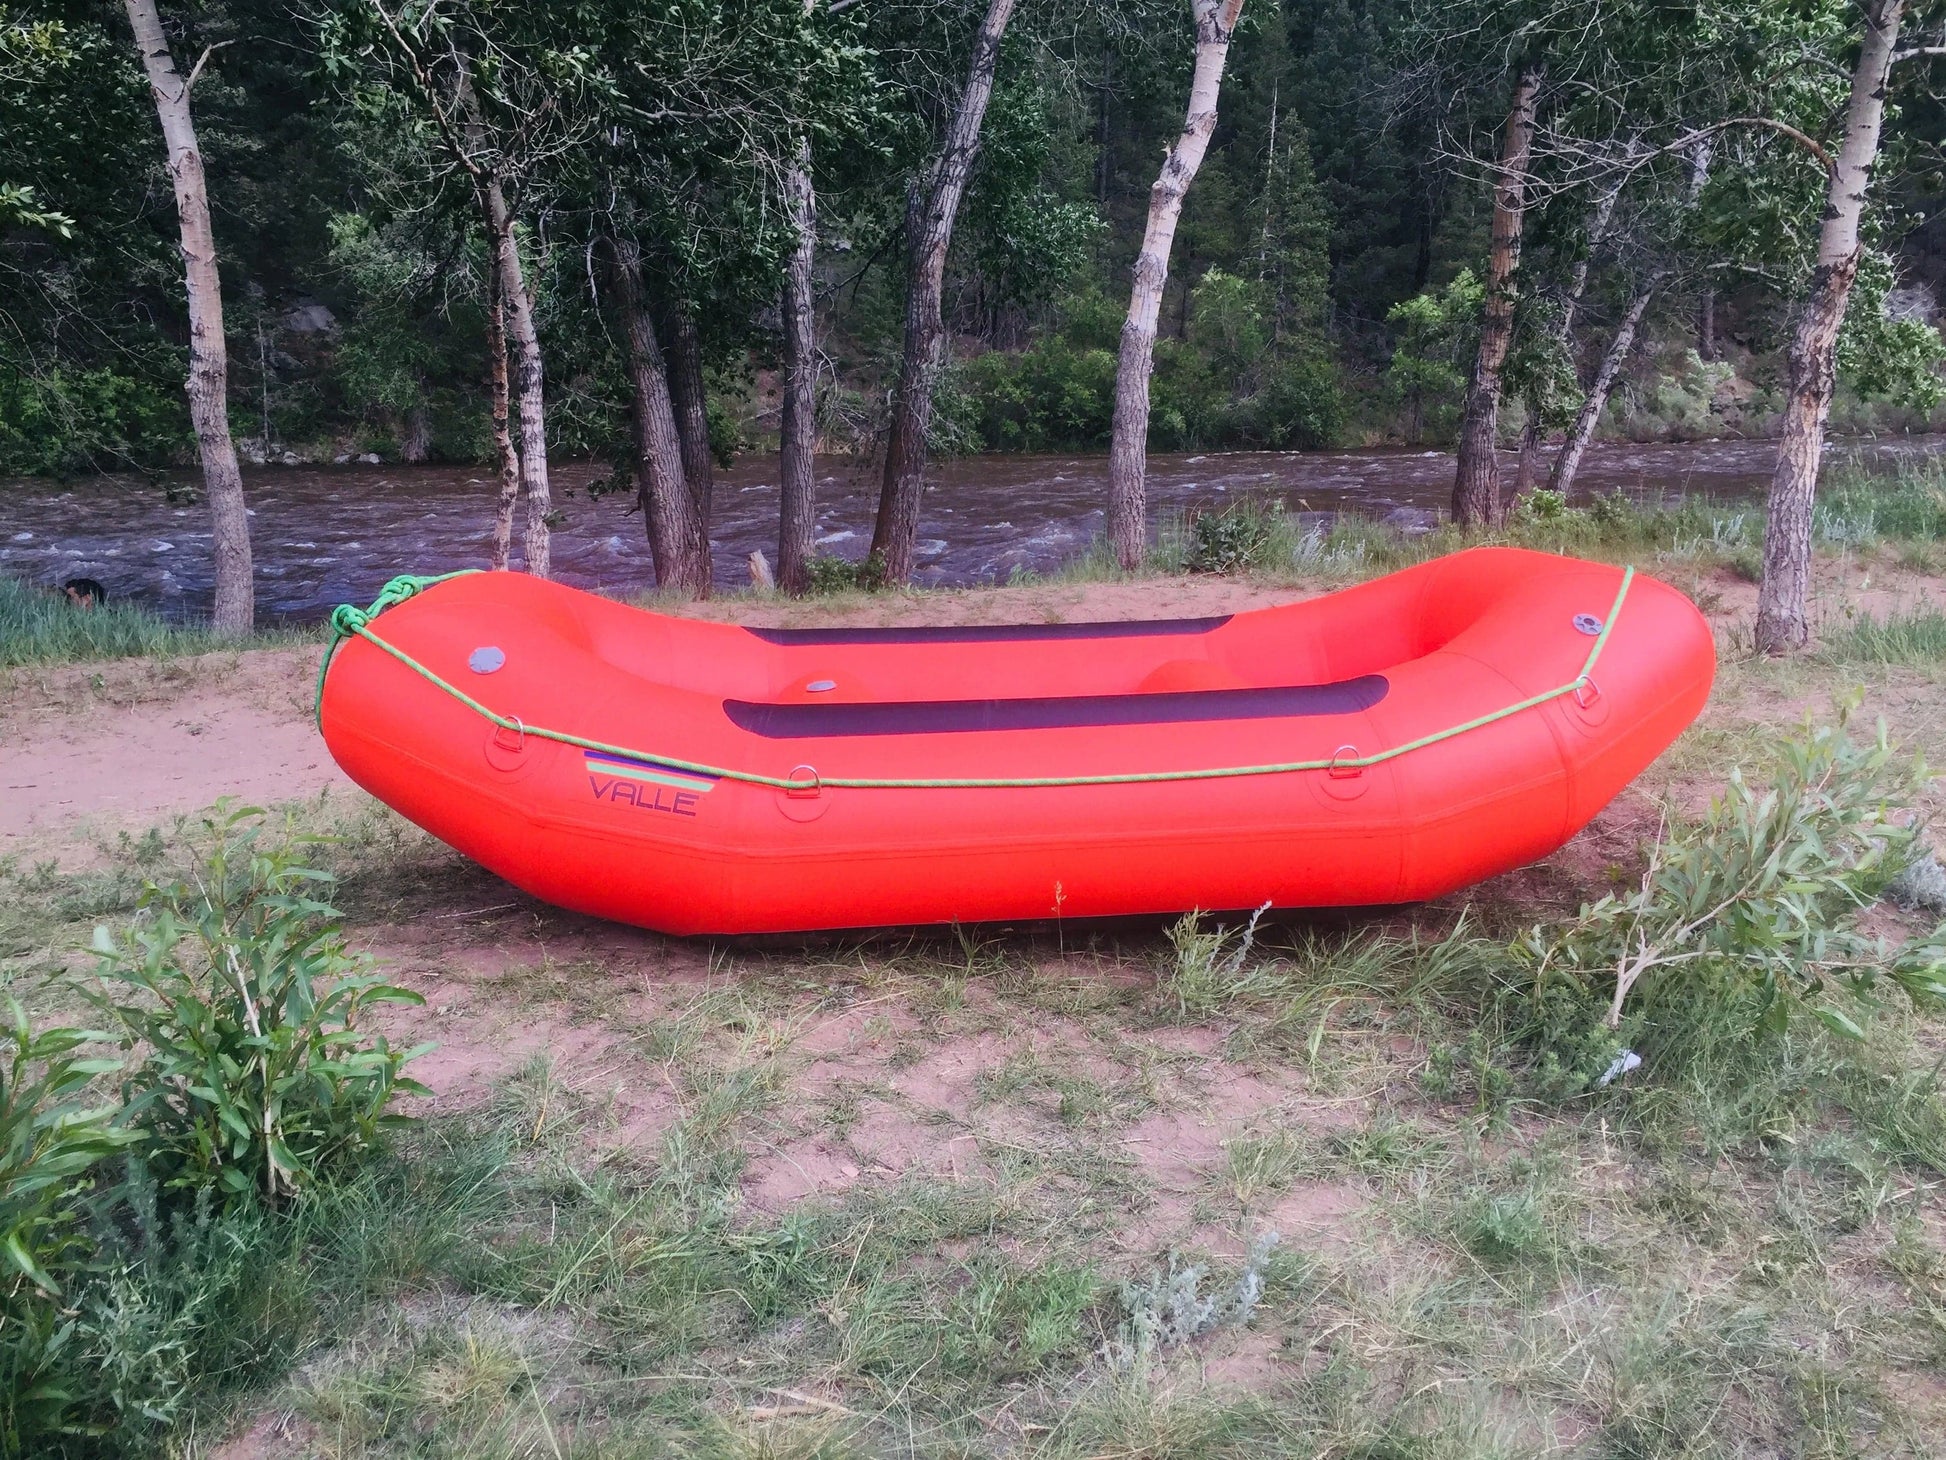 Featuring the Taquito 9' Raft raft manufactured by Valle shown here from a second angle.